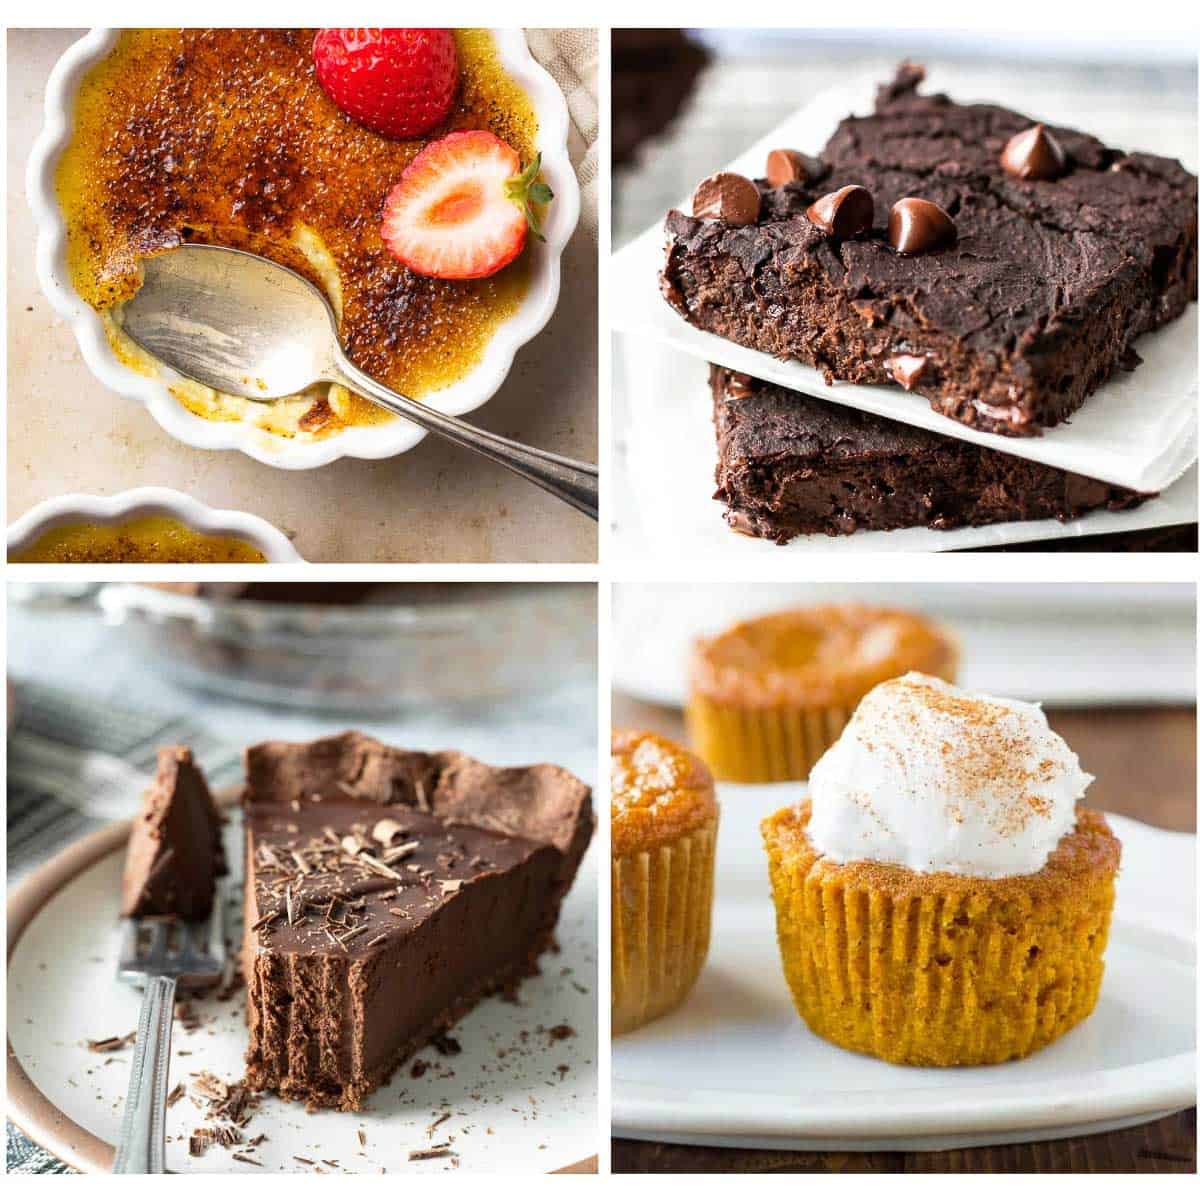 Gluten and Dairy free desserts for Thanksgiving.